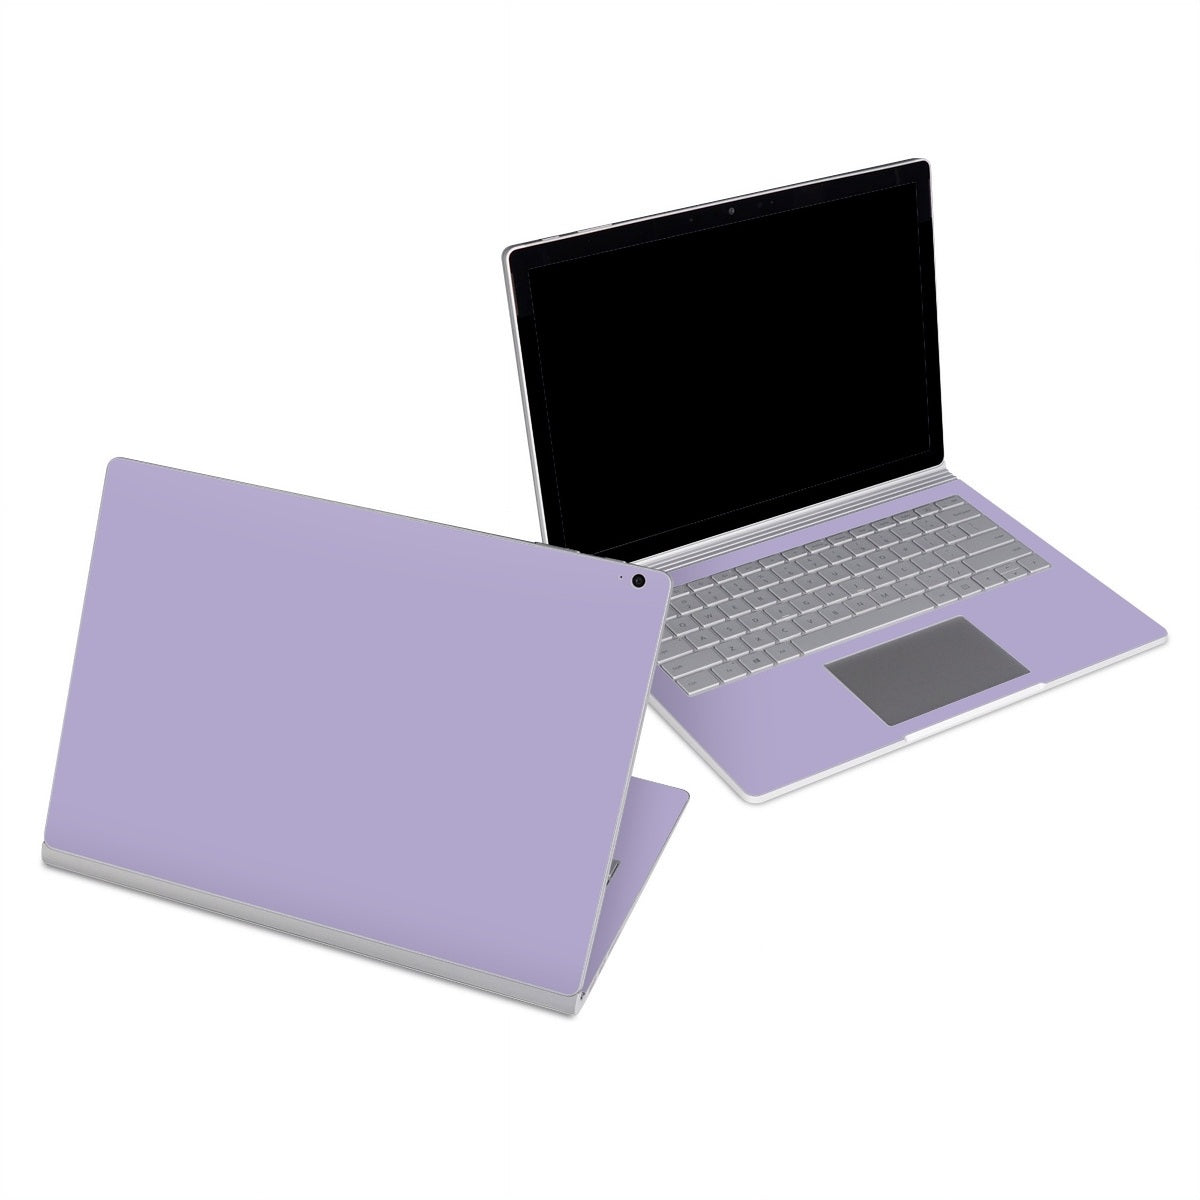 Solid State Lavender - Microsoft Surface Book Skin